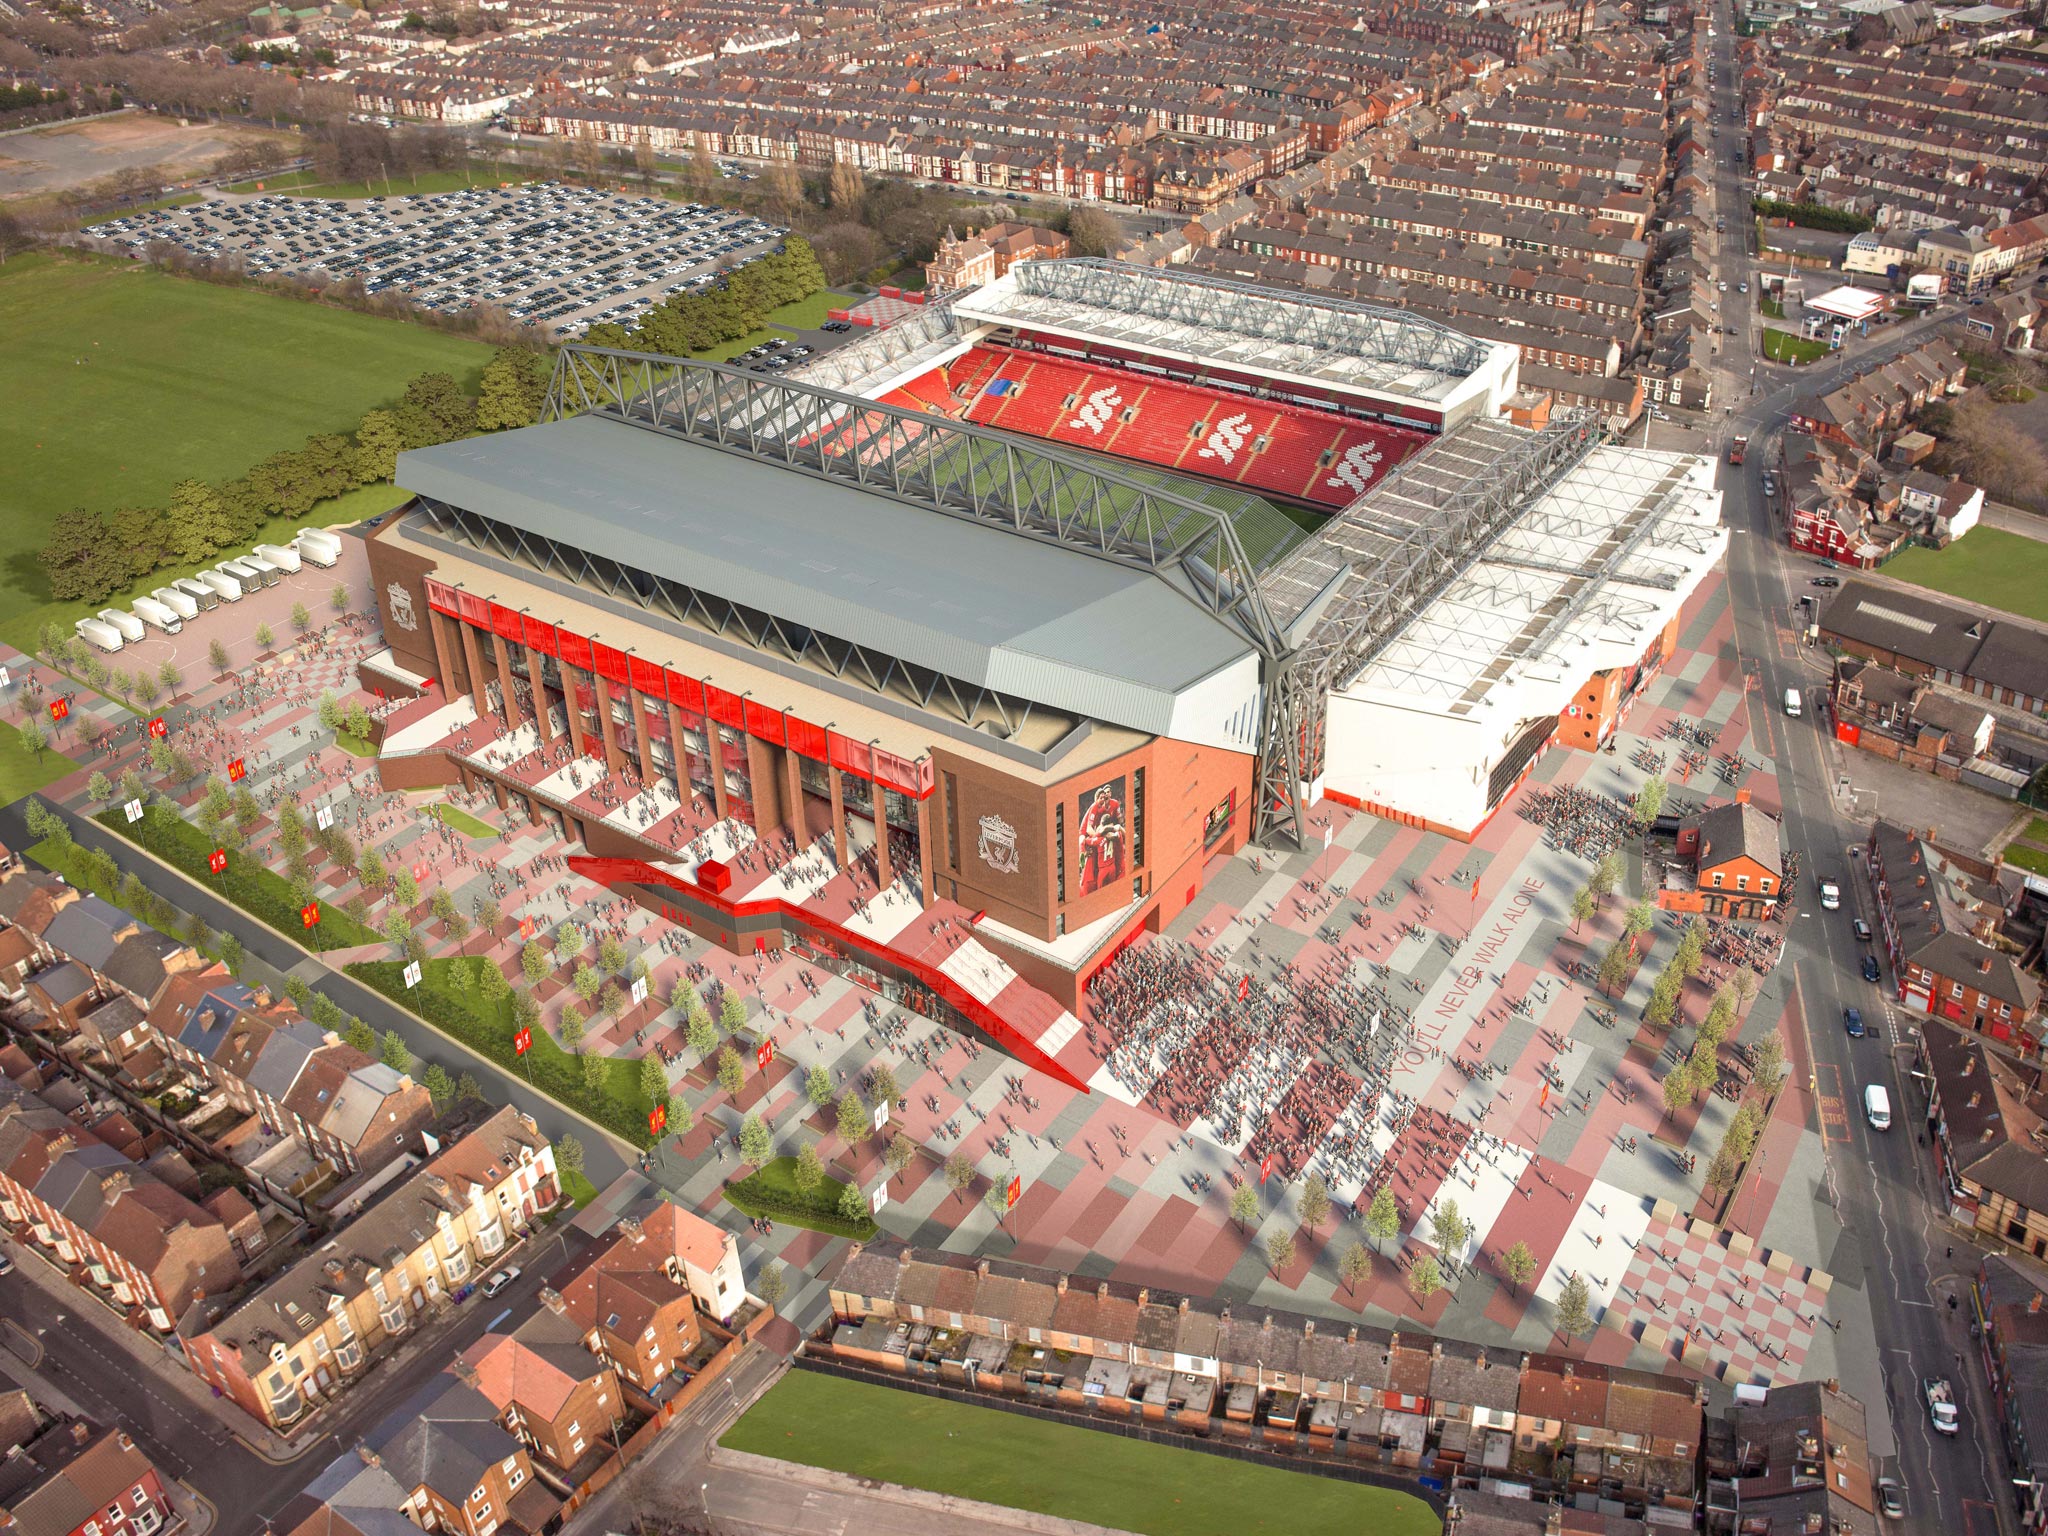 An overhead view of the proposed redeveloped Anfield and the wider public concourse area that will link the stadium to the Anfield area